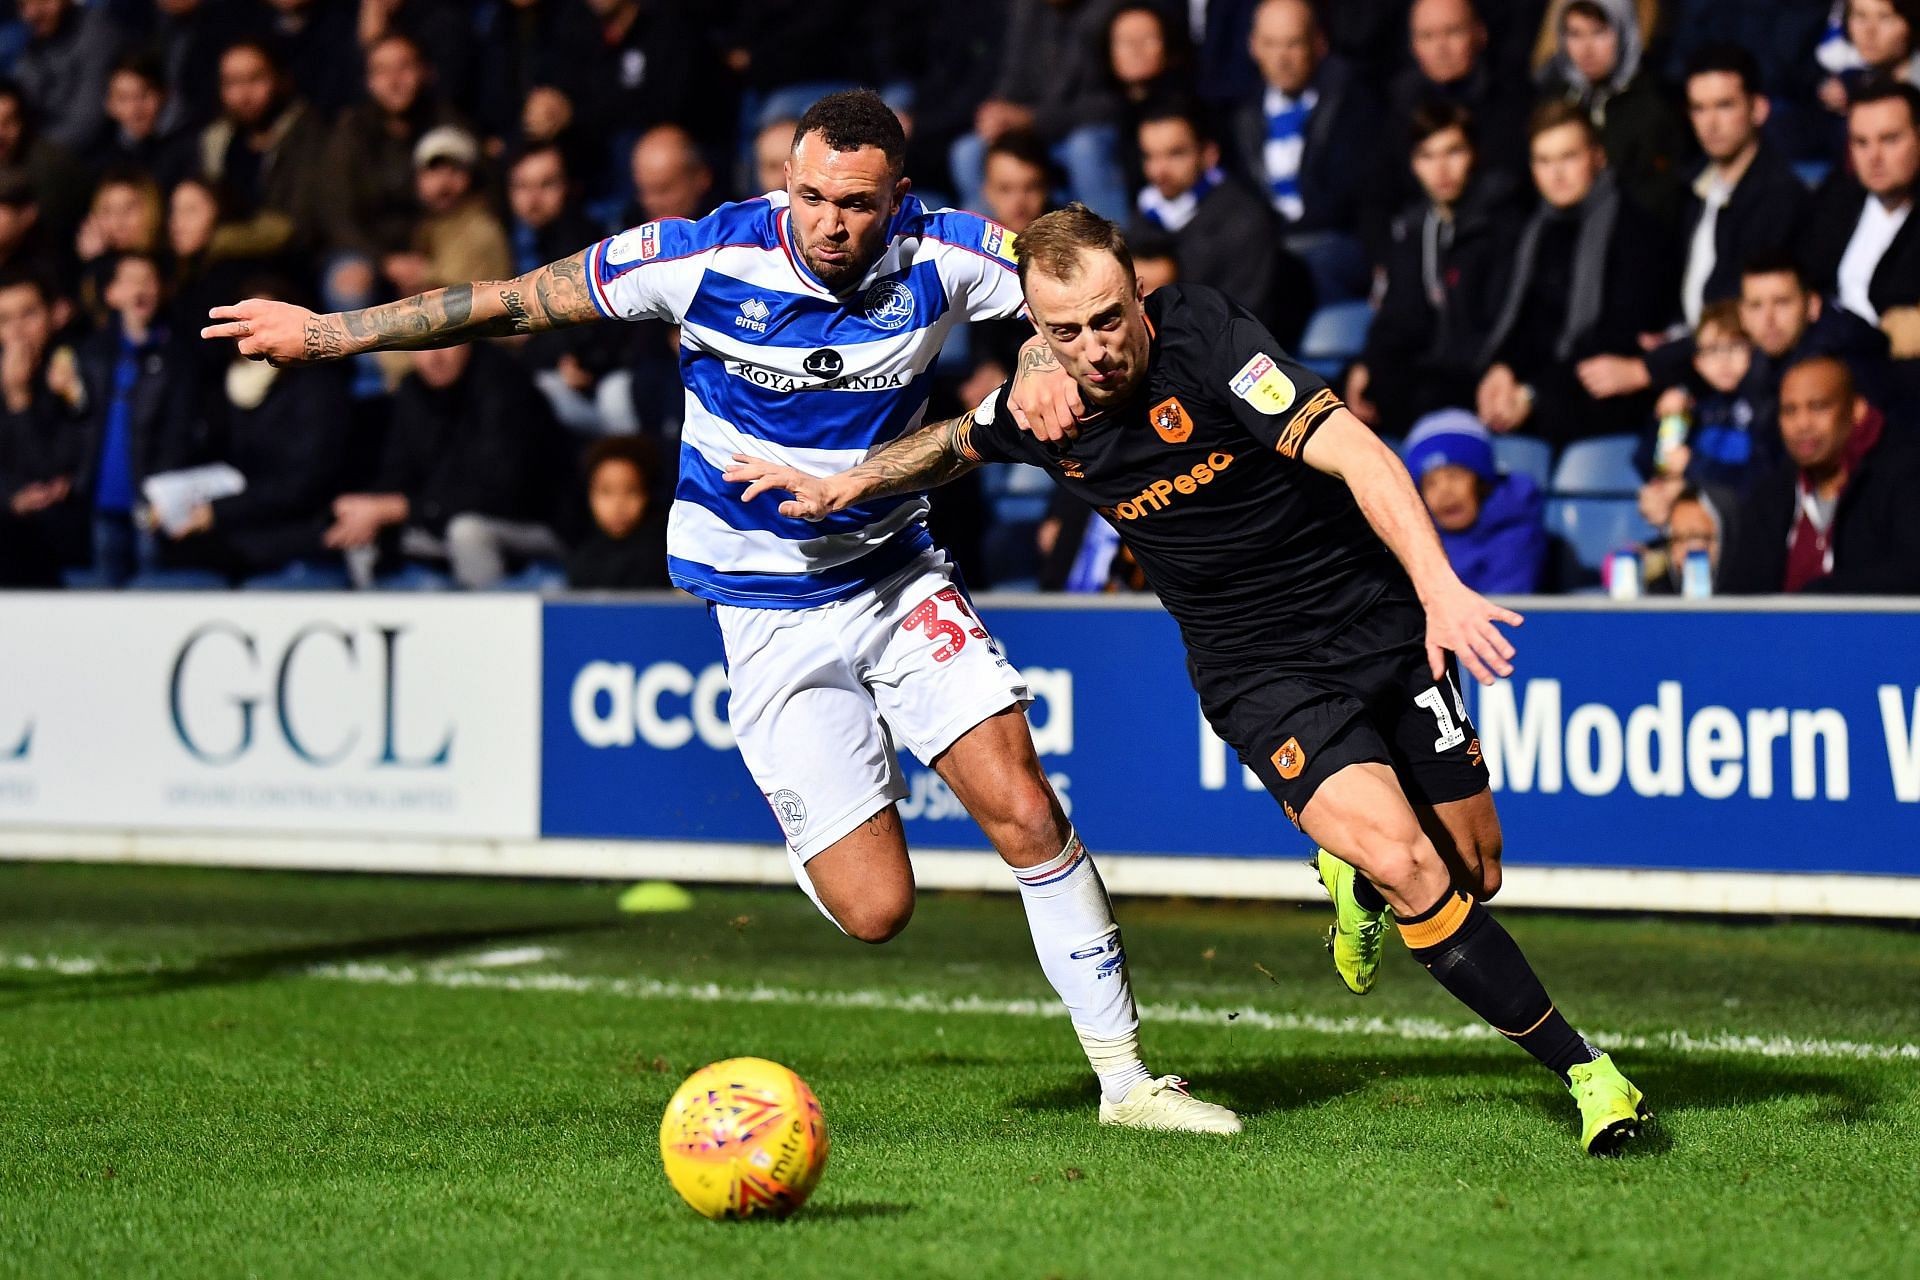 QPR are aiming for first a league double over Hull since 1970